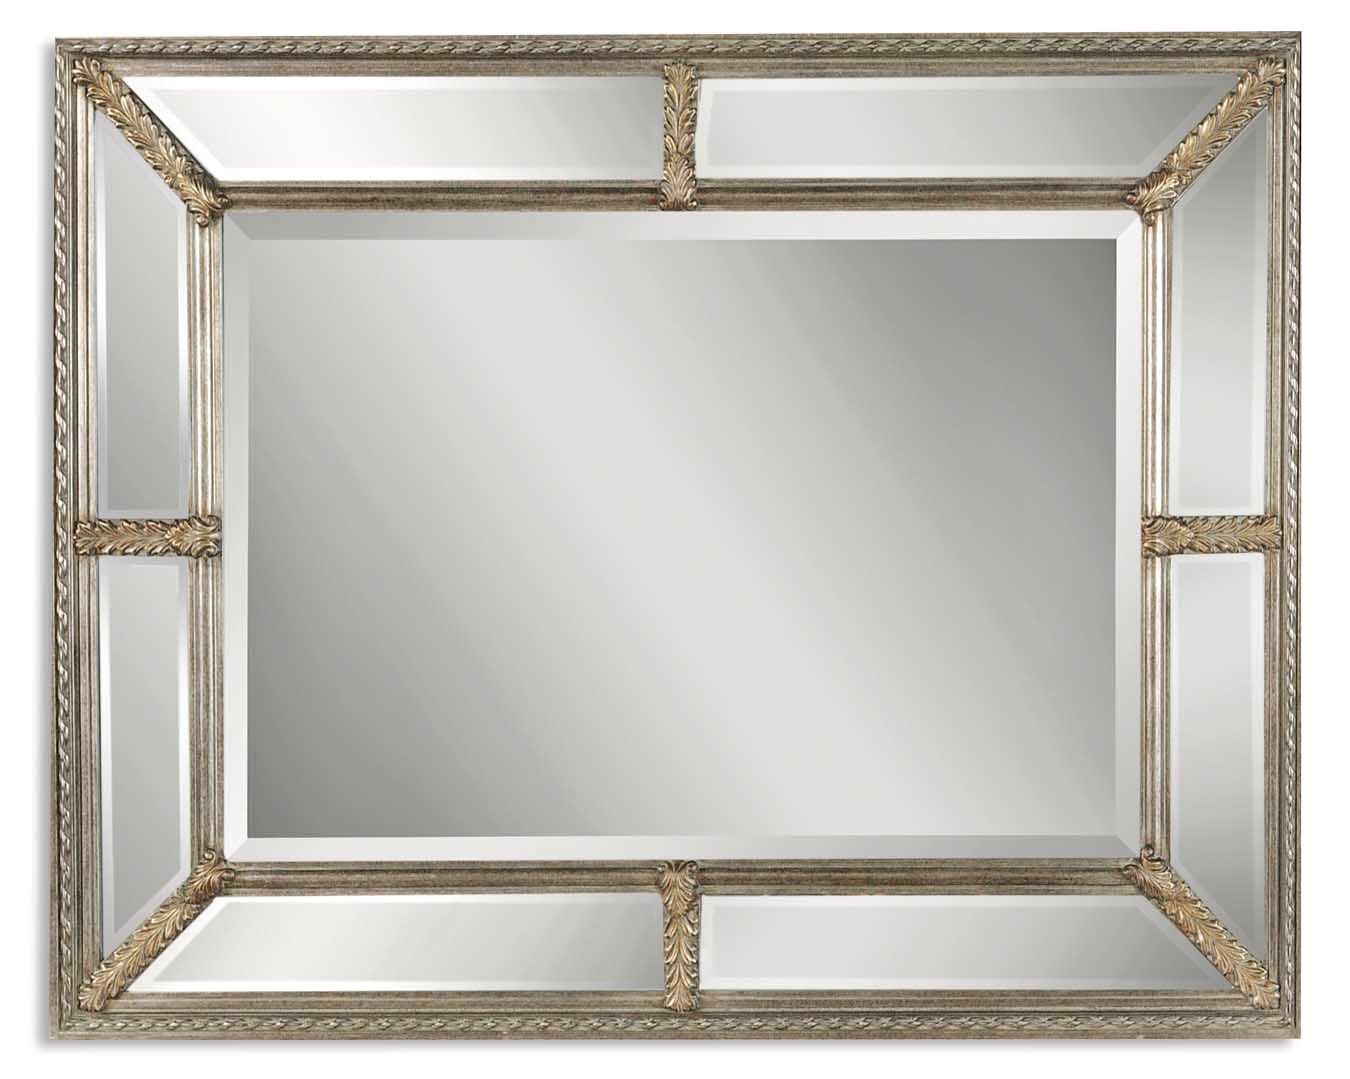 Lucinda Antique Beveled Mirror W/ Decorative Silver & Gold Leaf Frame Throughout Glam Silver Leaf Beaded Wall Mirrors (View 15 of 15)